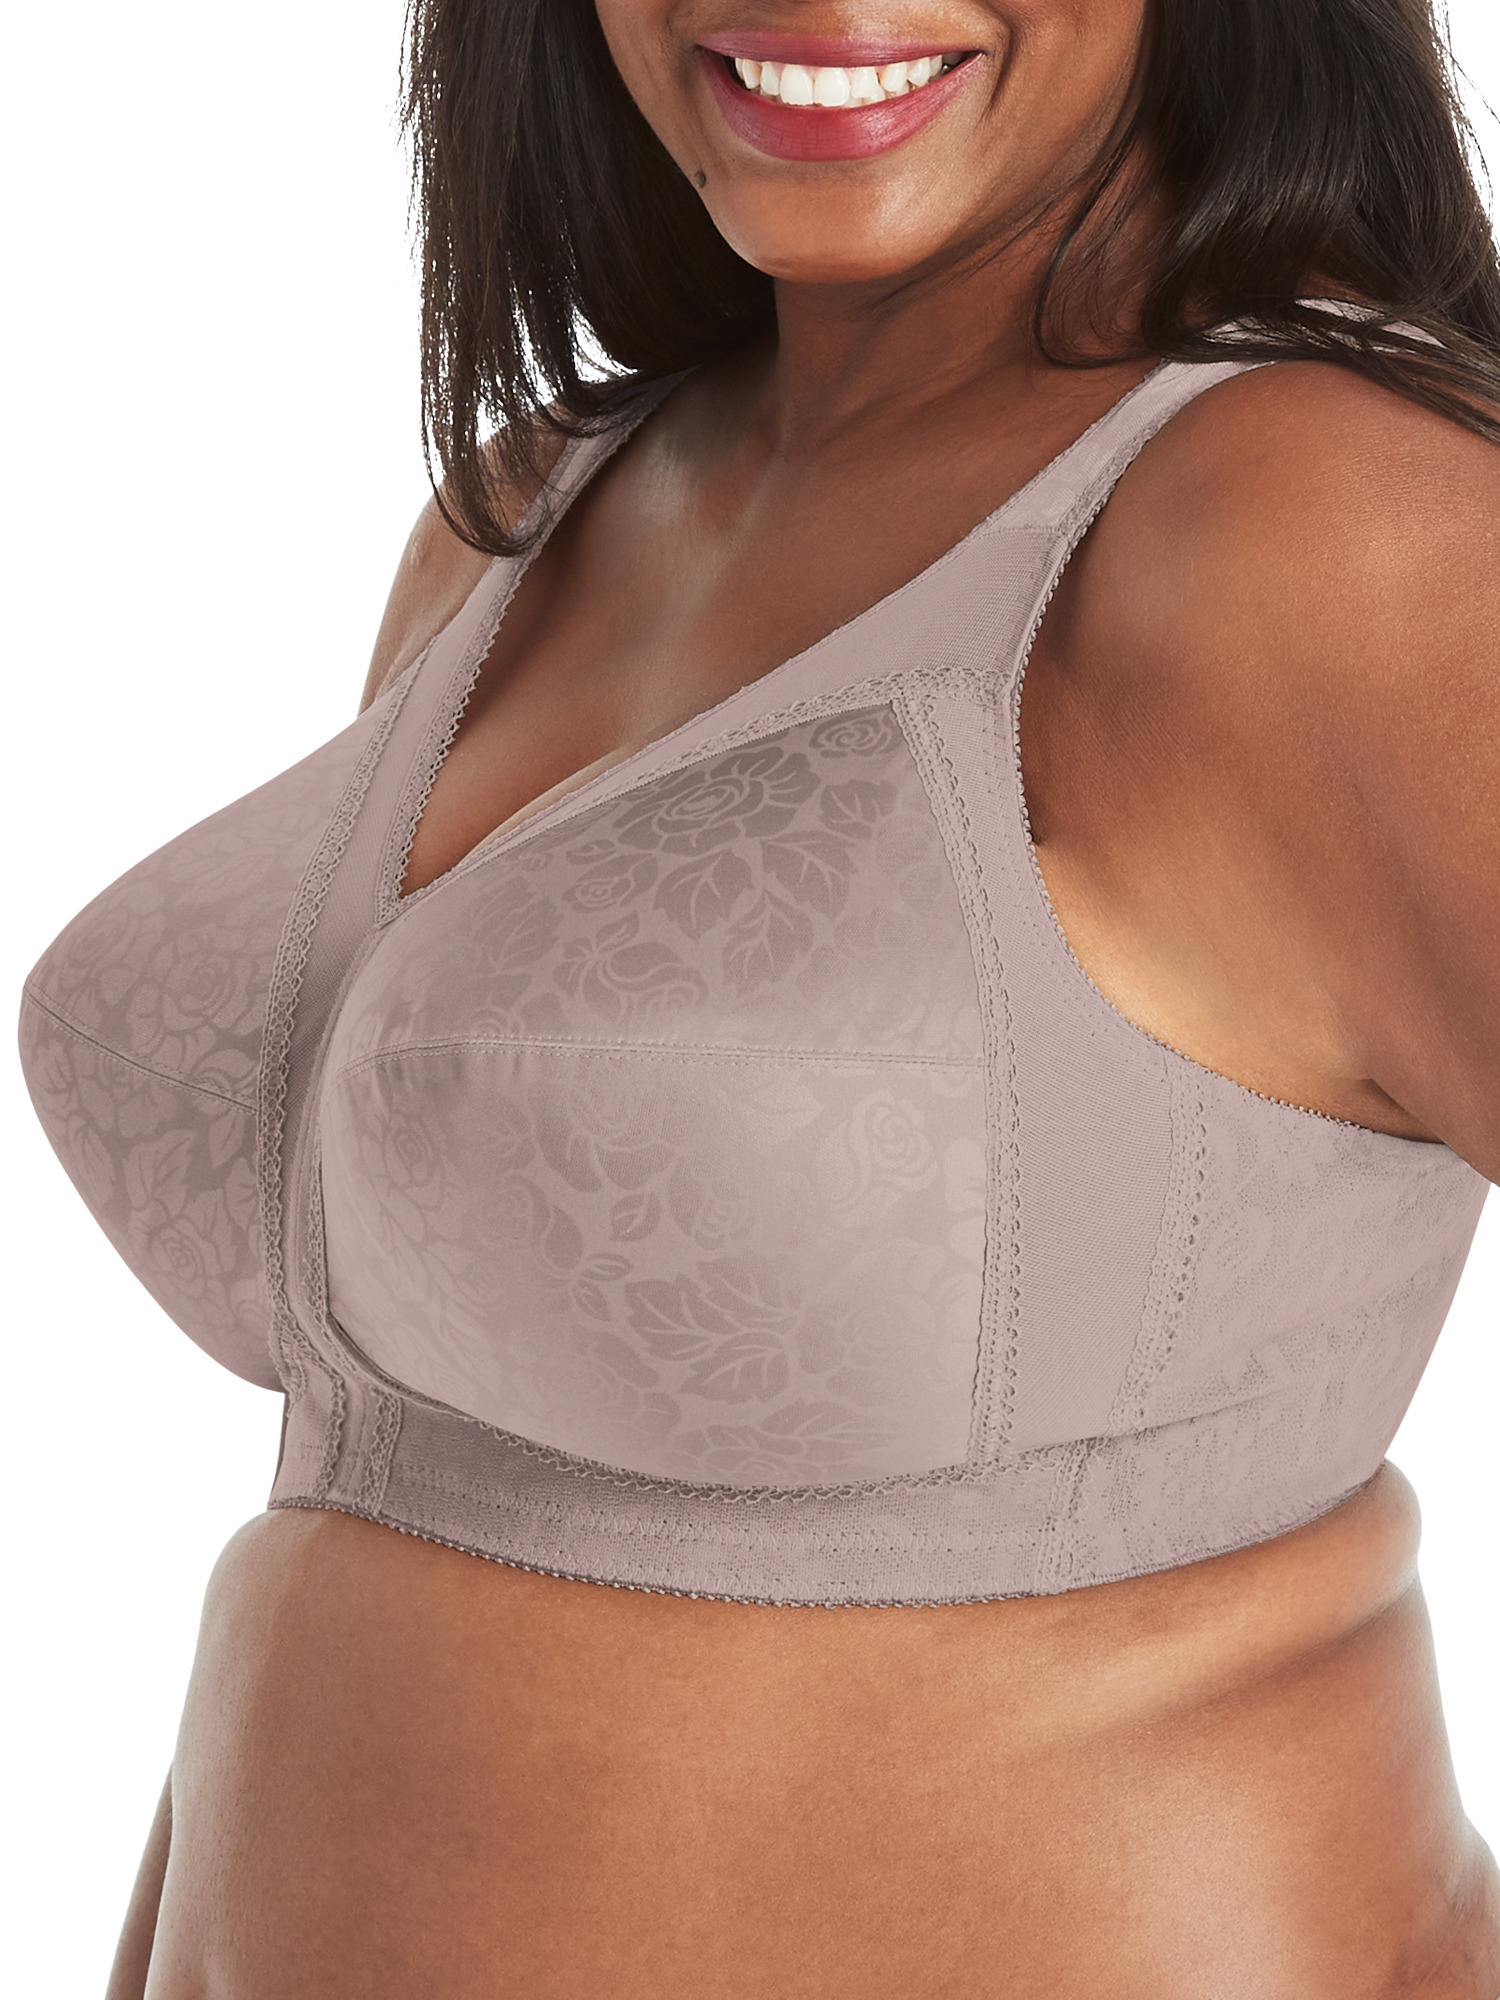 PLAYTEX Womens Nursing Wirefree Cami with Built-in Shelf Bra, XL, Blush at   Women's Clothing store